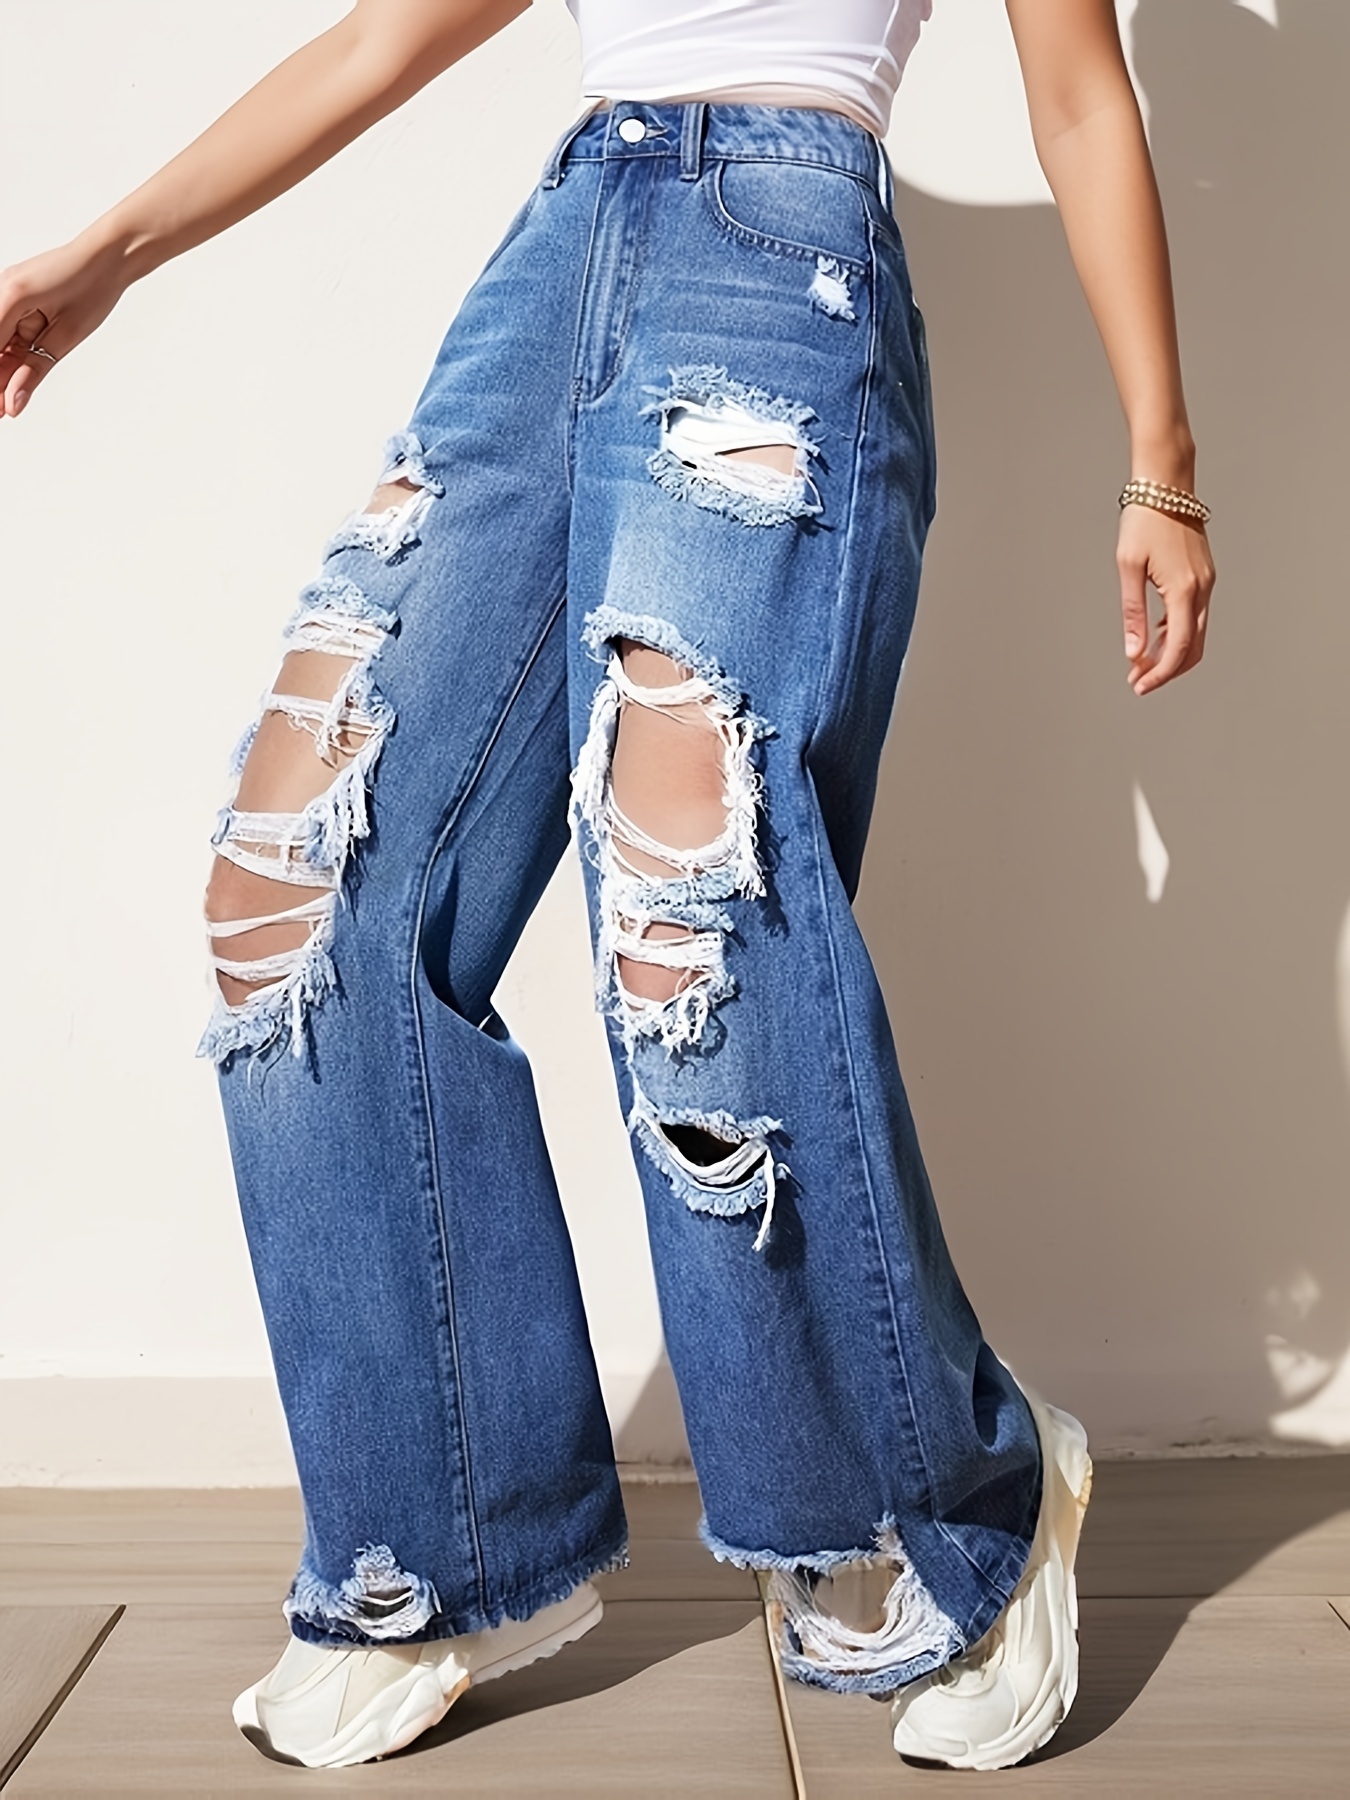 Tall Relaxed Fit Distressed Jeans